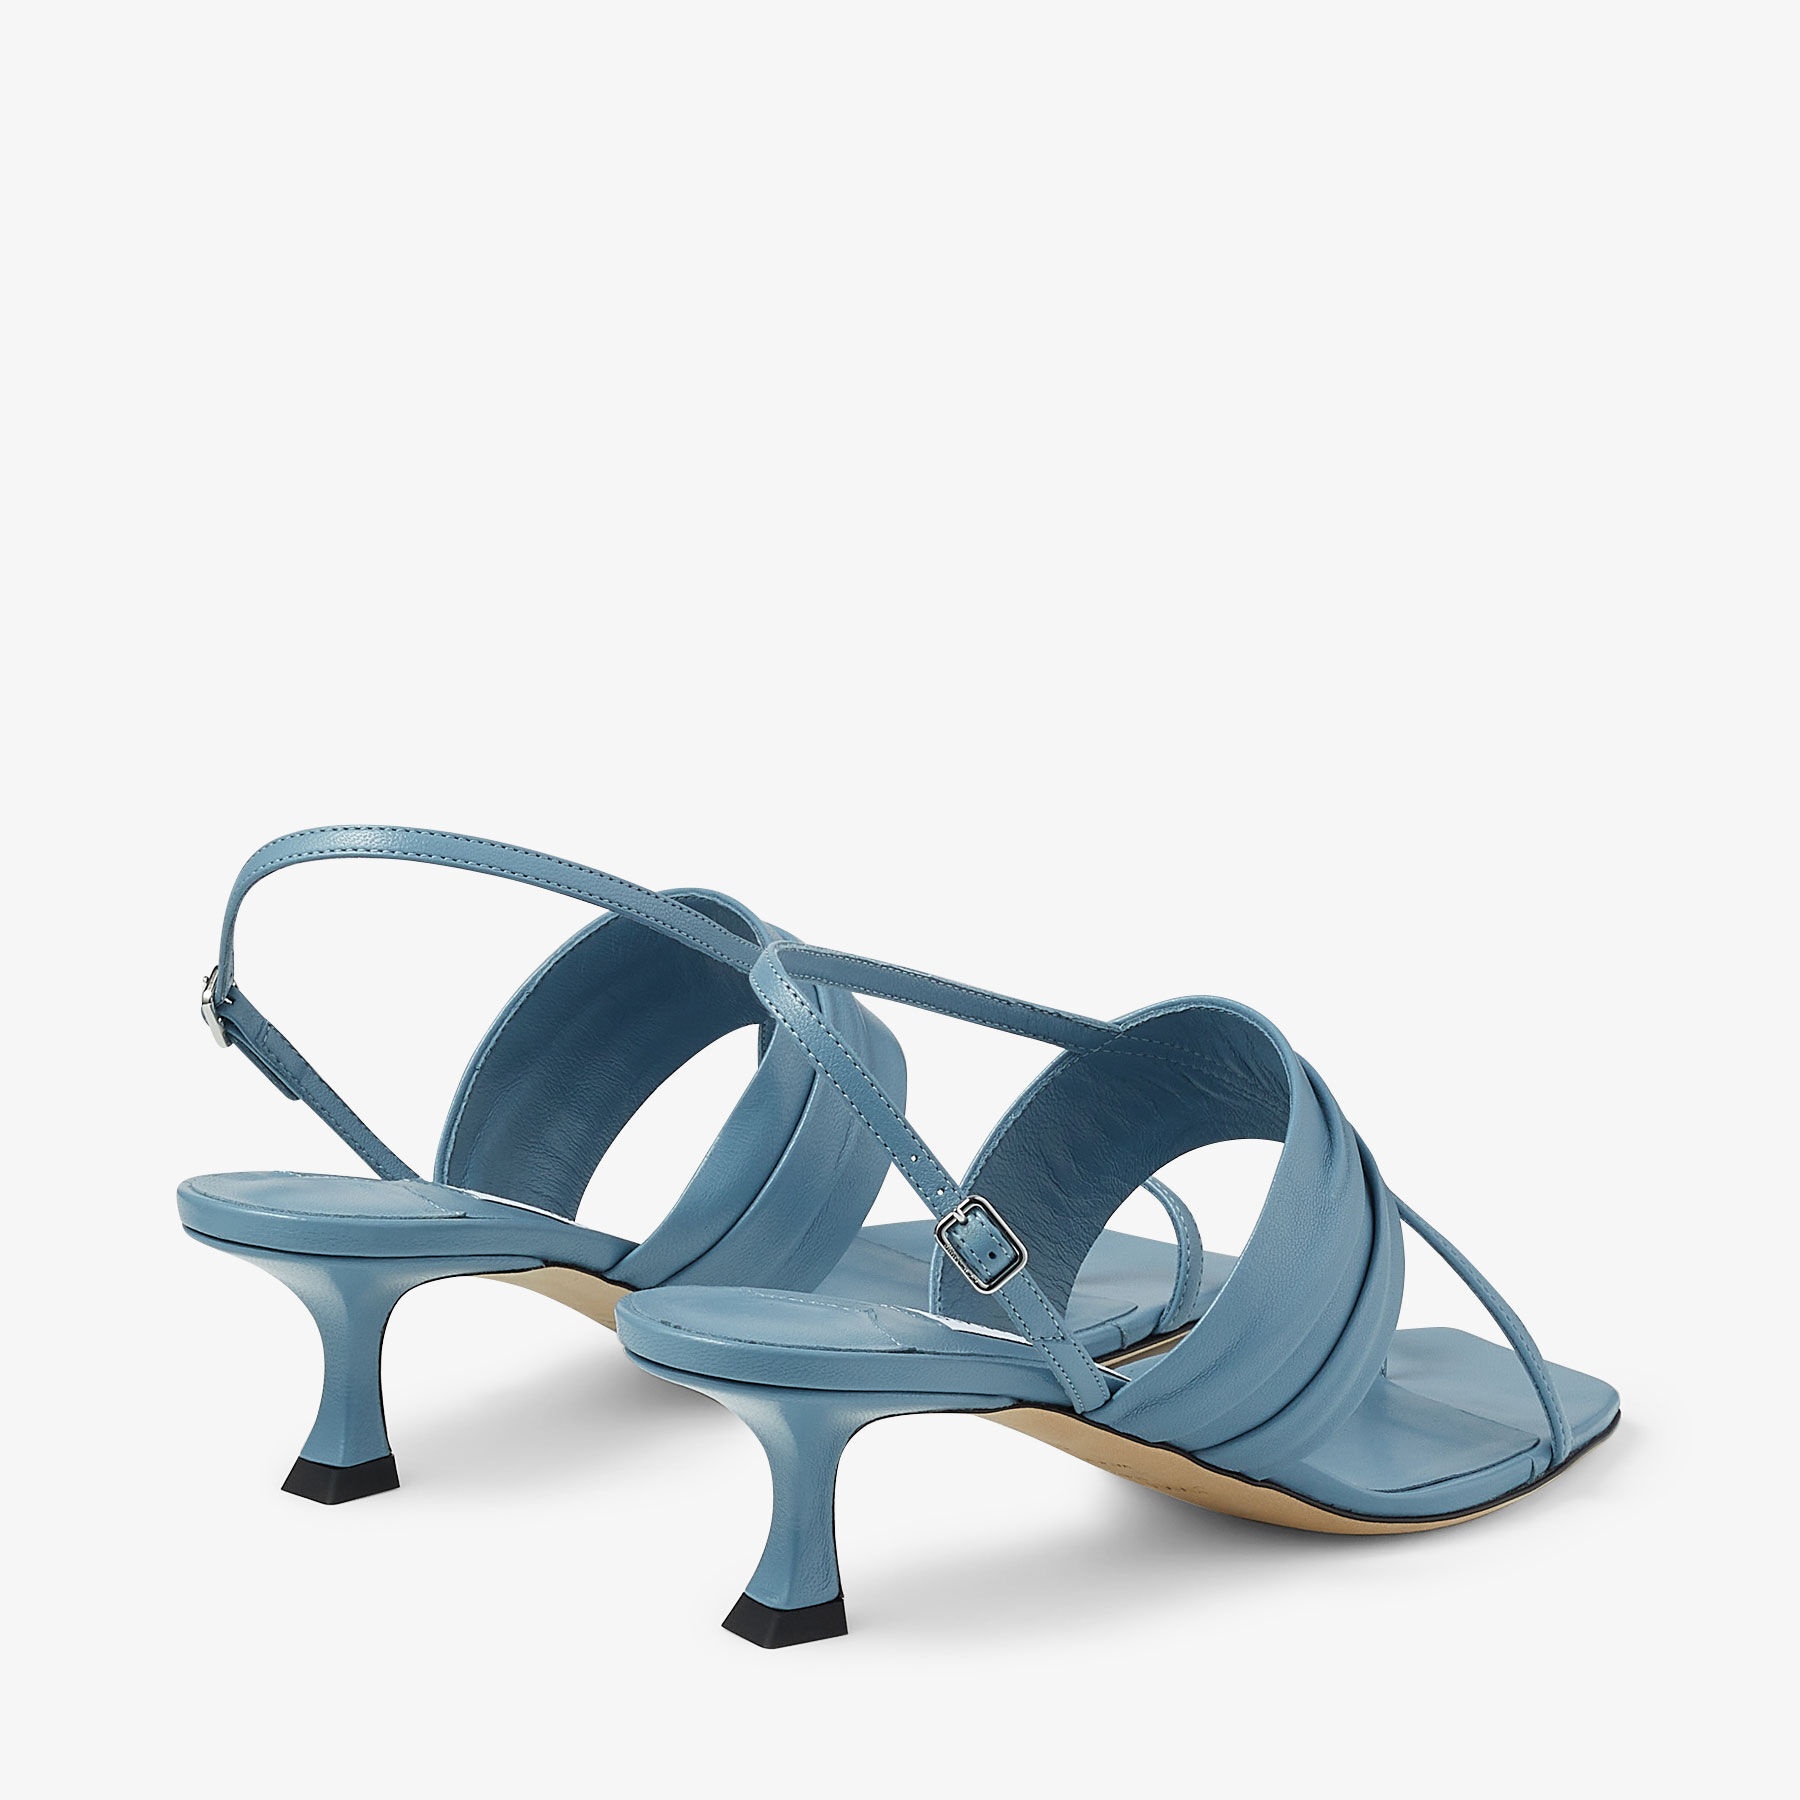 Beziers 50
Smoky Blue Nappa Leather Sandals - 6